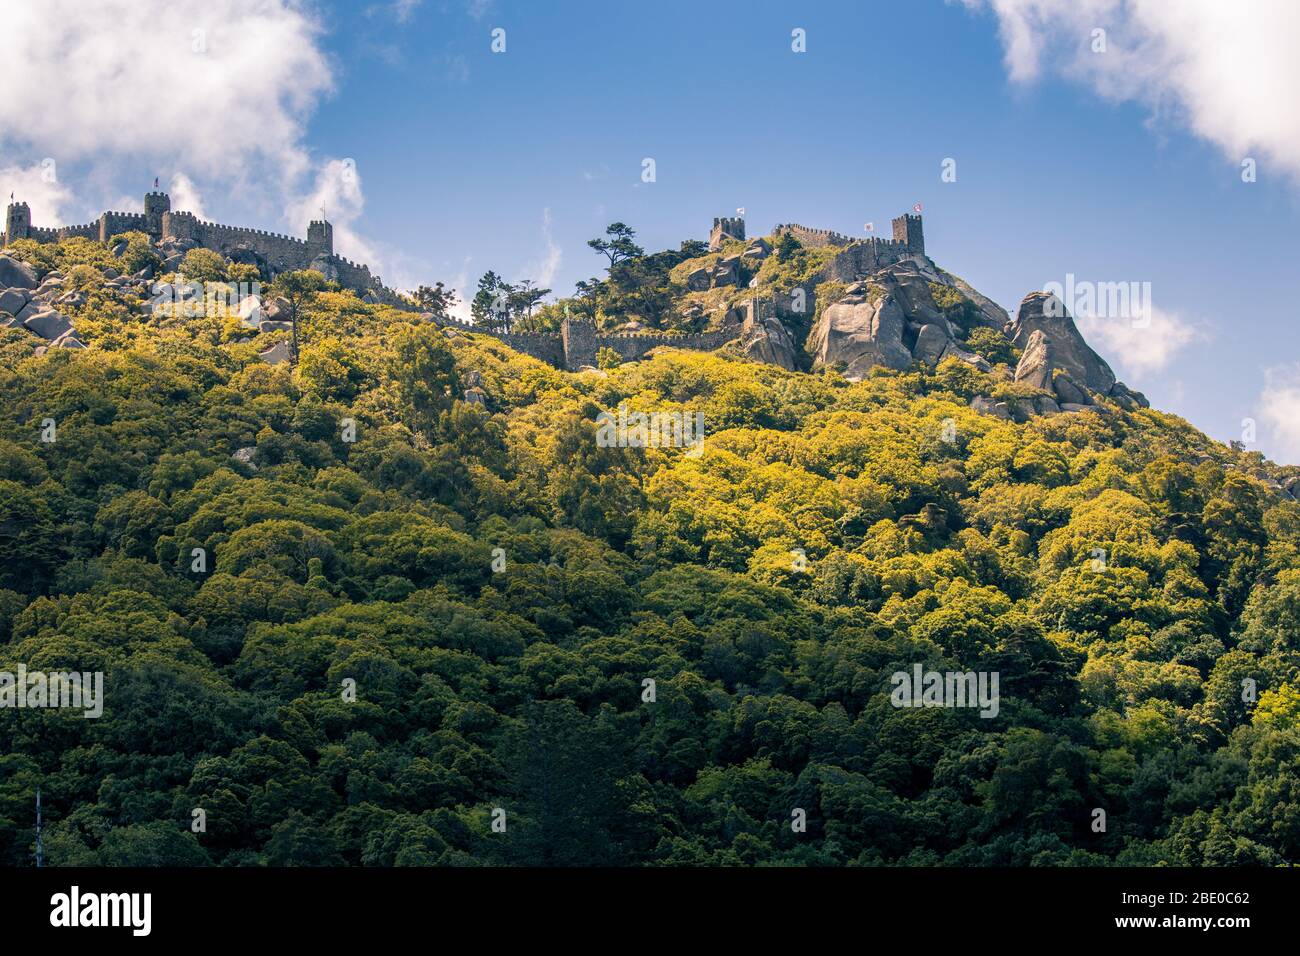 Portuguese hilltop castle at Sintra. The castle was built by the Moors in the 10th century following their successful conquest of Portugal and Spain Stock Photo